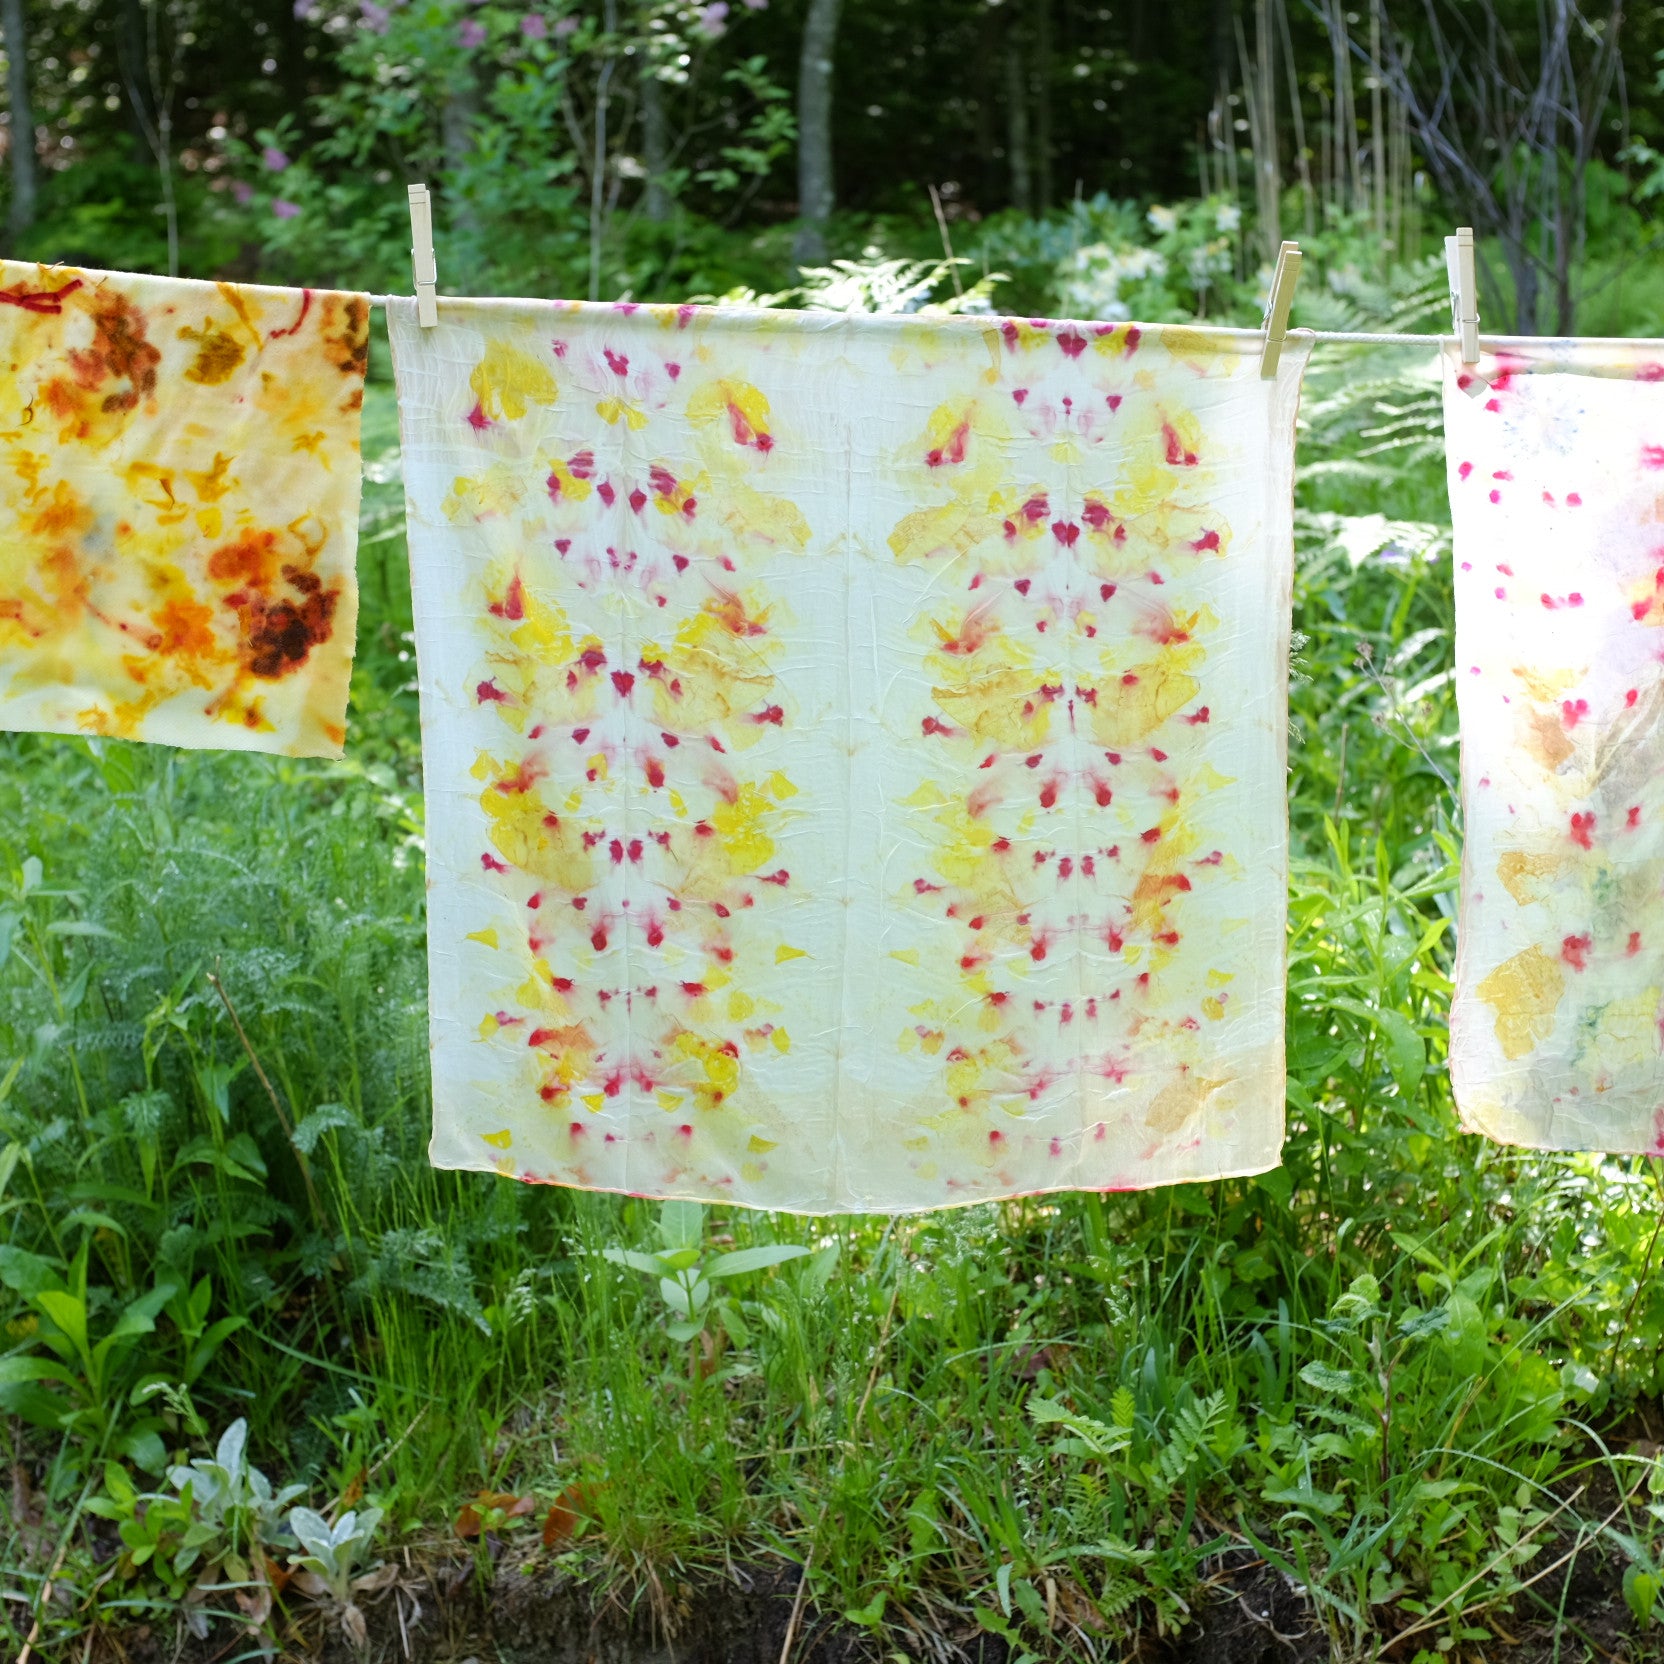 Mapping Color: Ecoprinting with Plants on Fabric - Saturday, July 8th